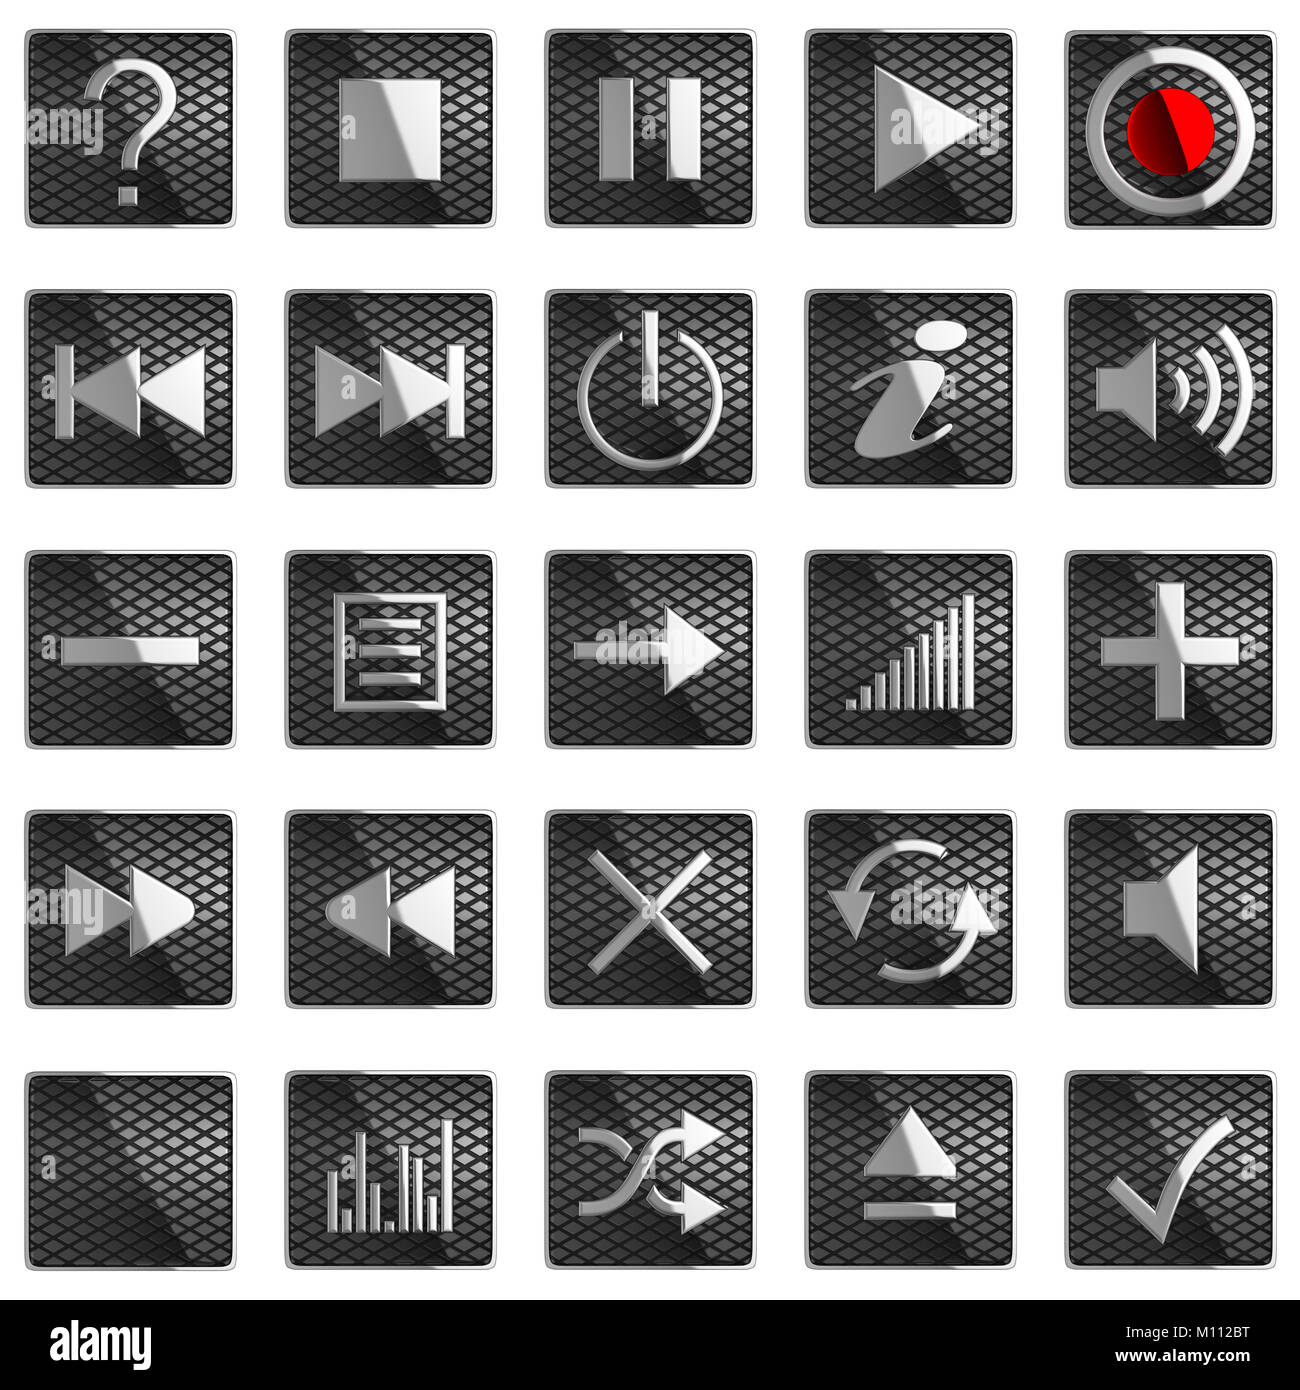 Square Control panel buttons isolated on black Stock Photo